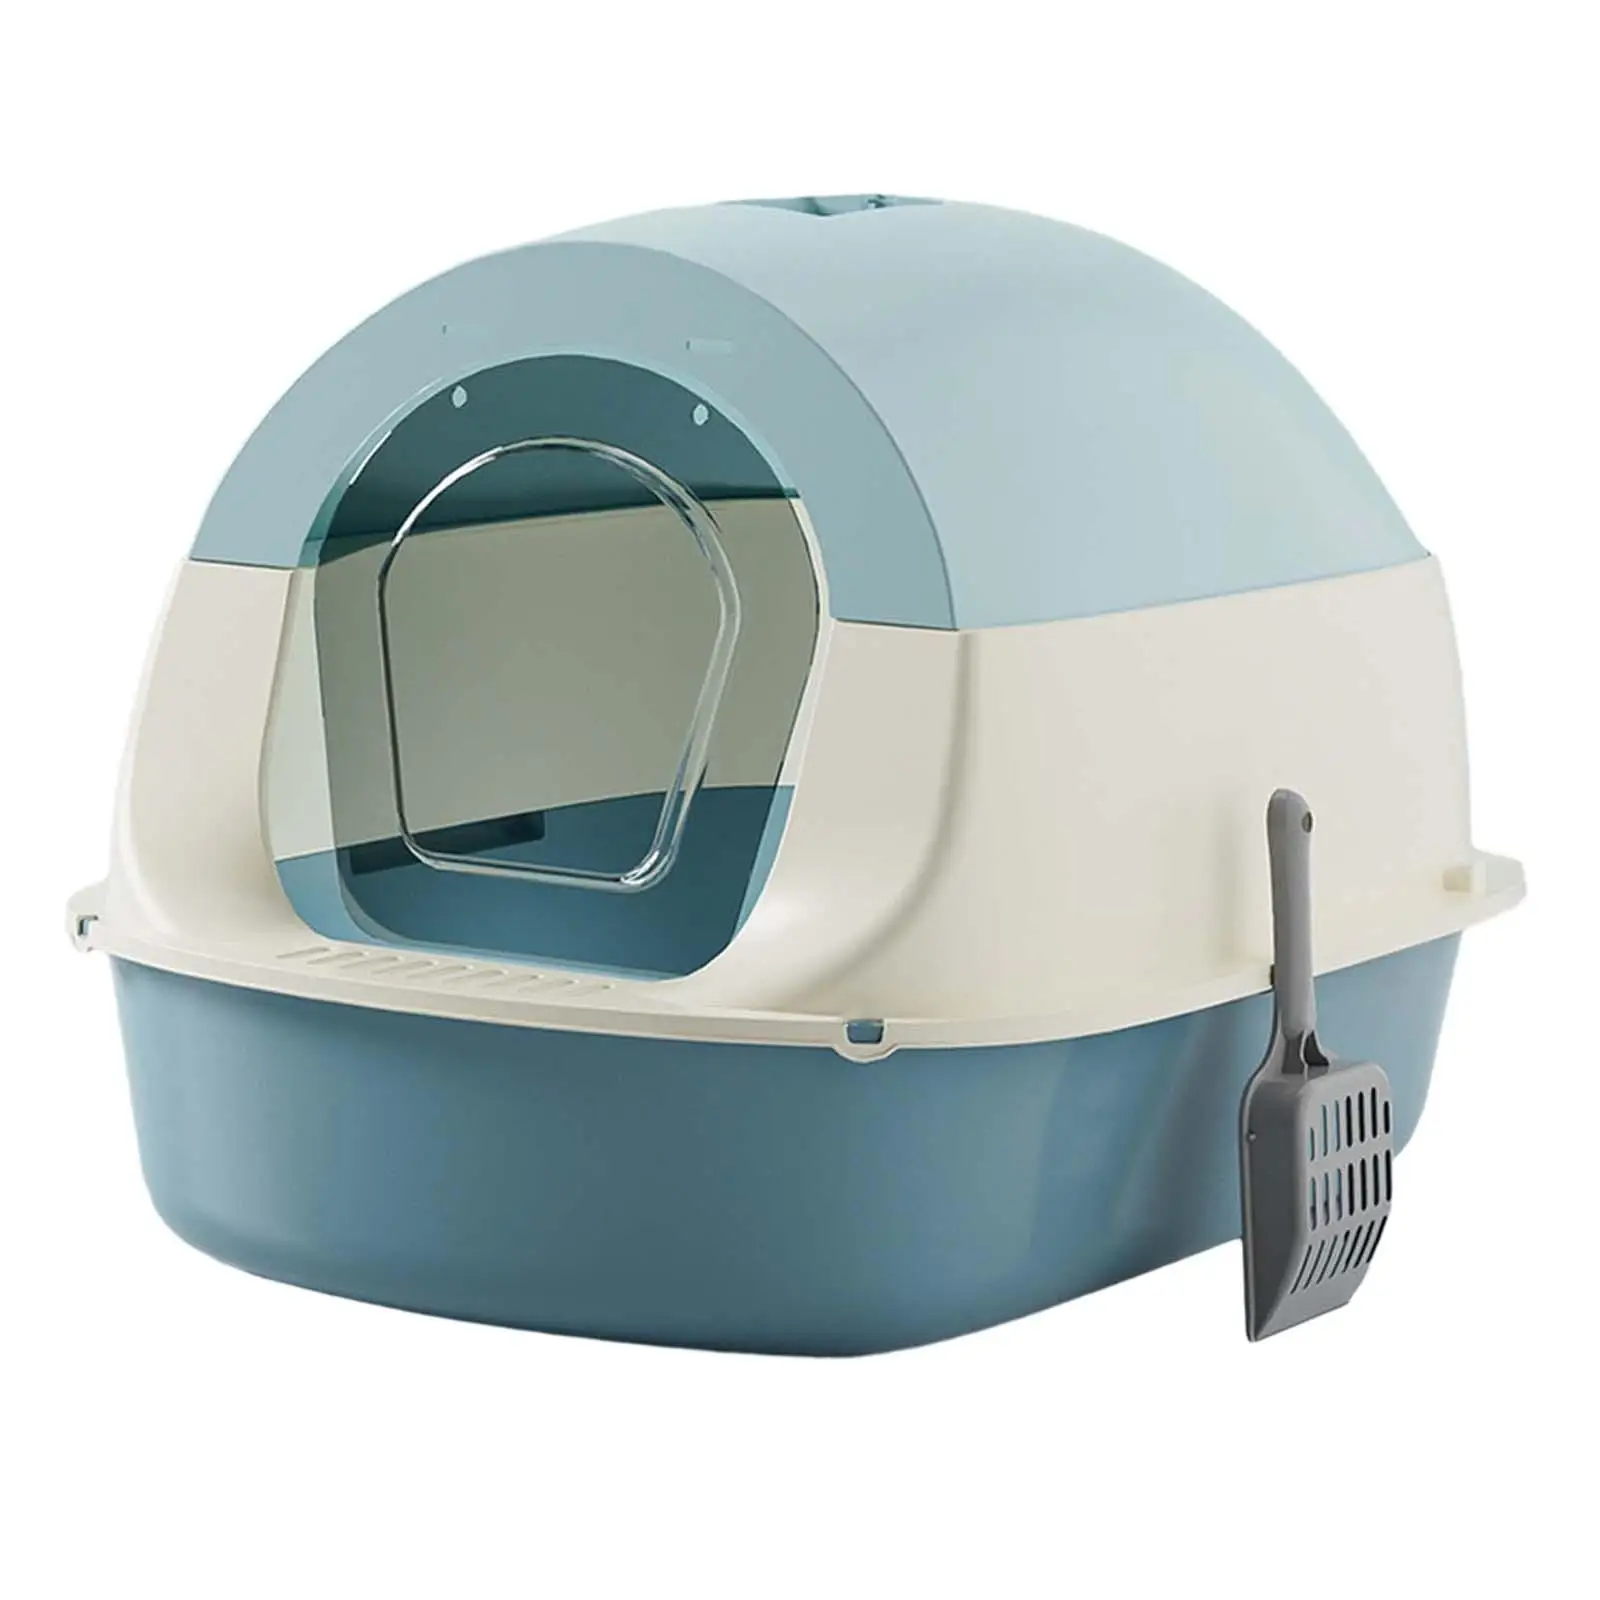 Hooded Cat Litter Box with Lid Detachable Enclosed Cat Toilet with Shovel